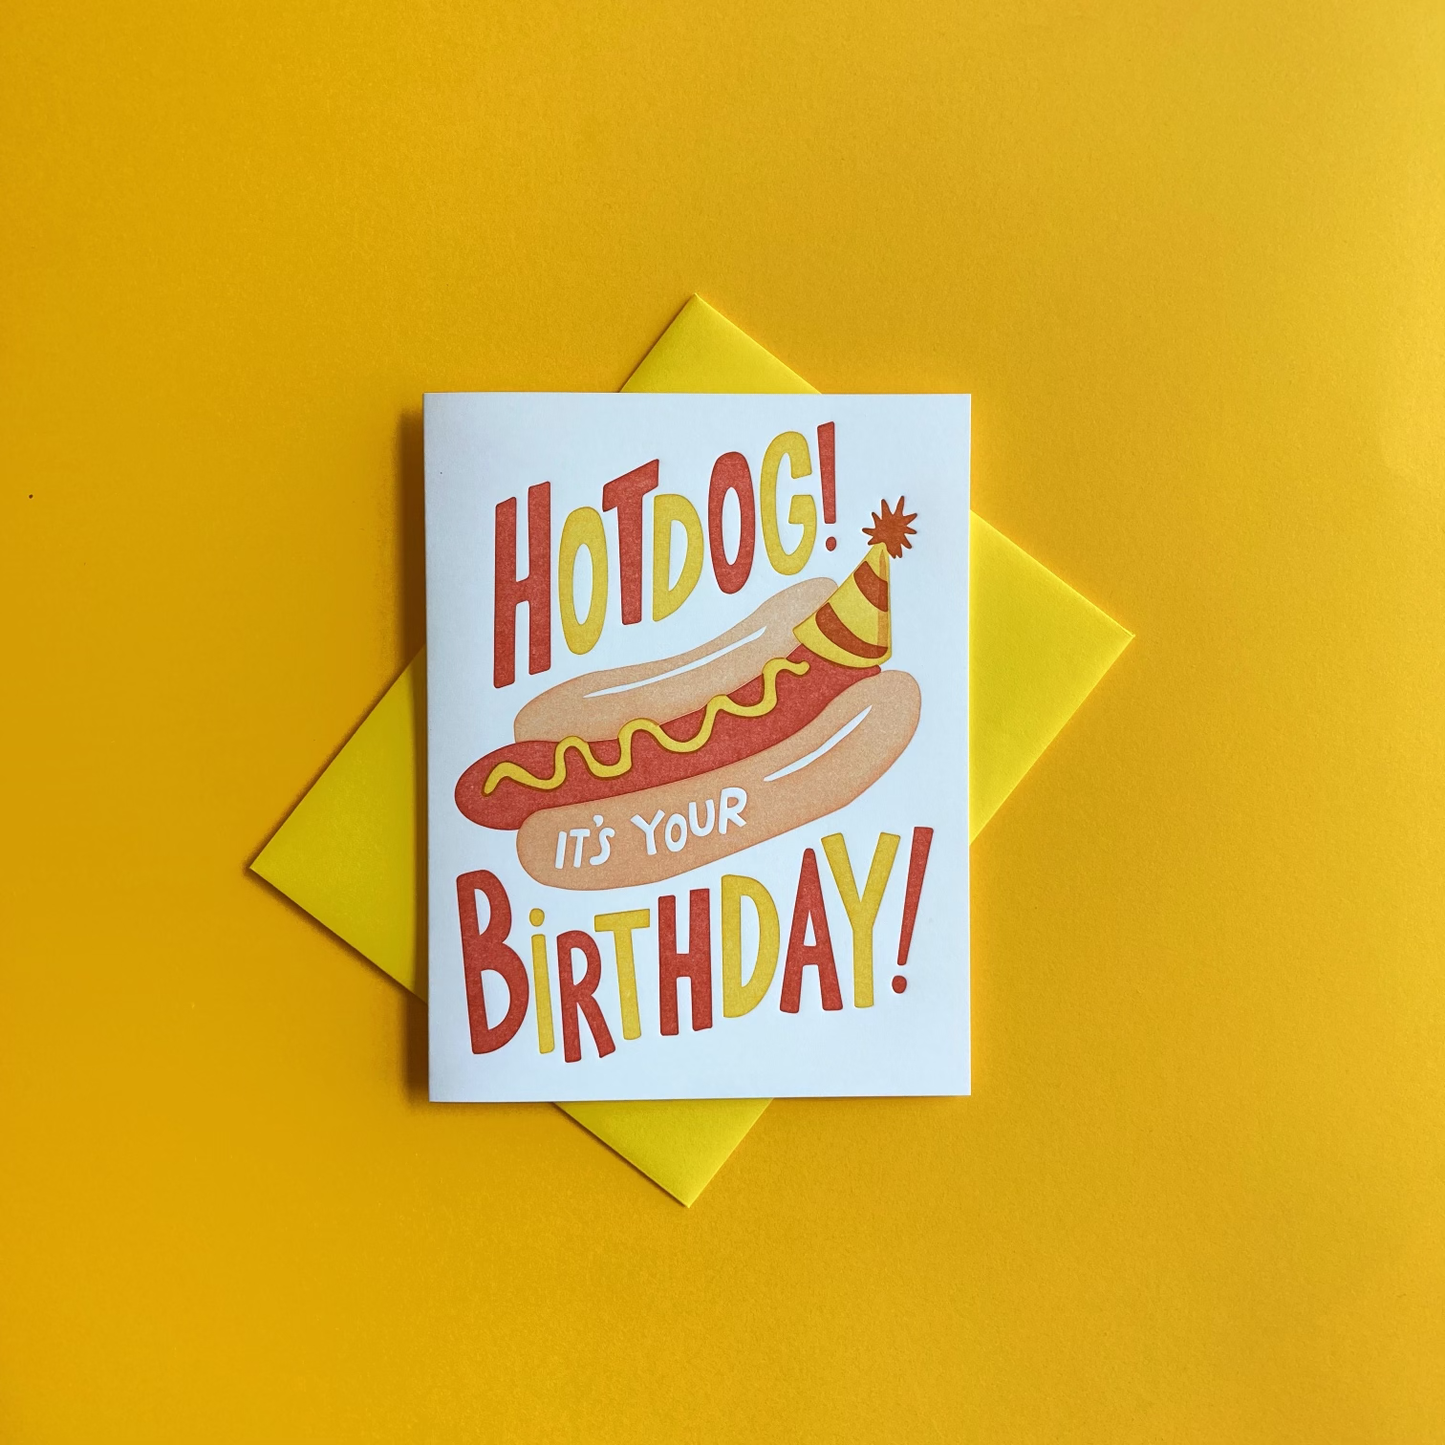 Greeting card with a yellow envelope -- text reads "Hotdog! it's your birthday!" with an image of a hot dog in a bun with mustard on it, wearing a birthday party hat